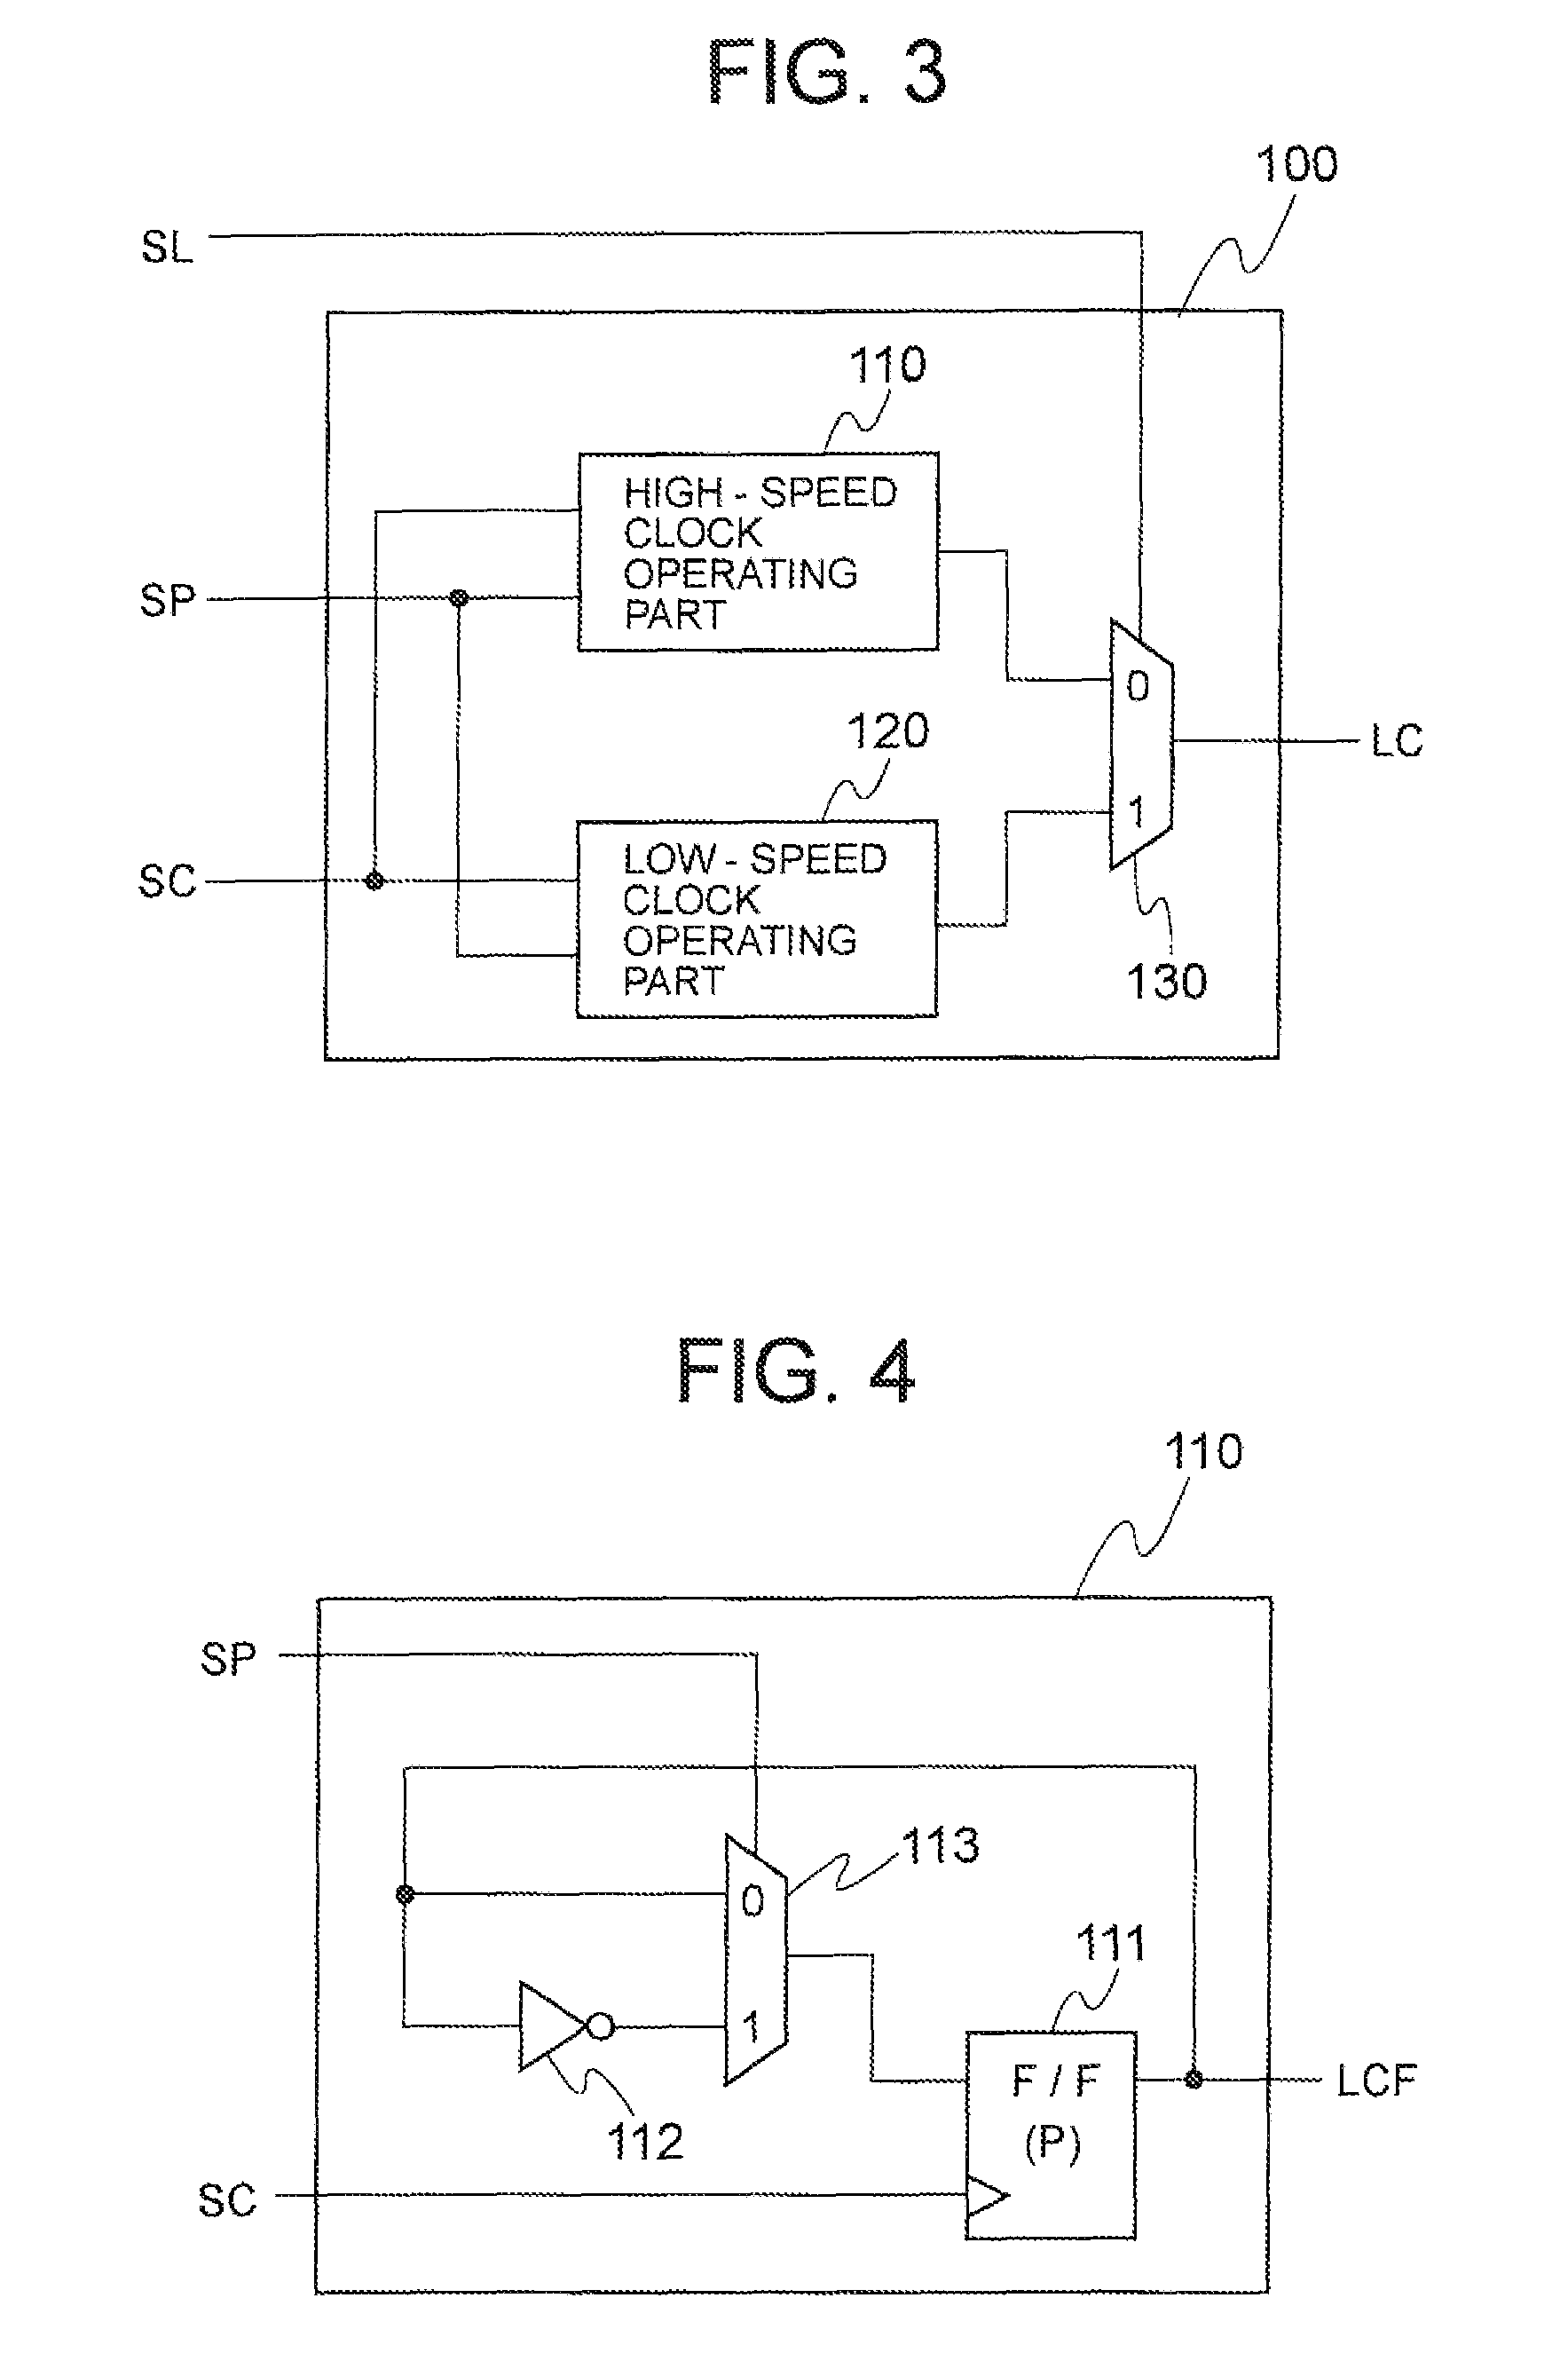 Transmission and receiving apparatus and method having different sending and receiving clocks